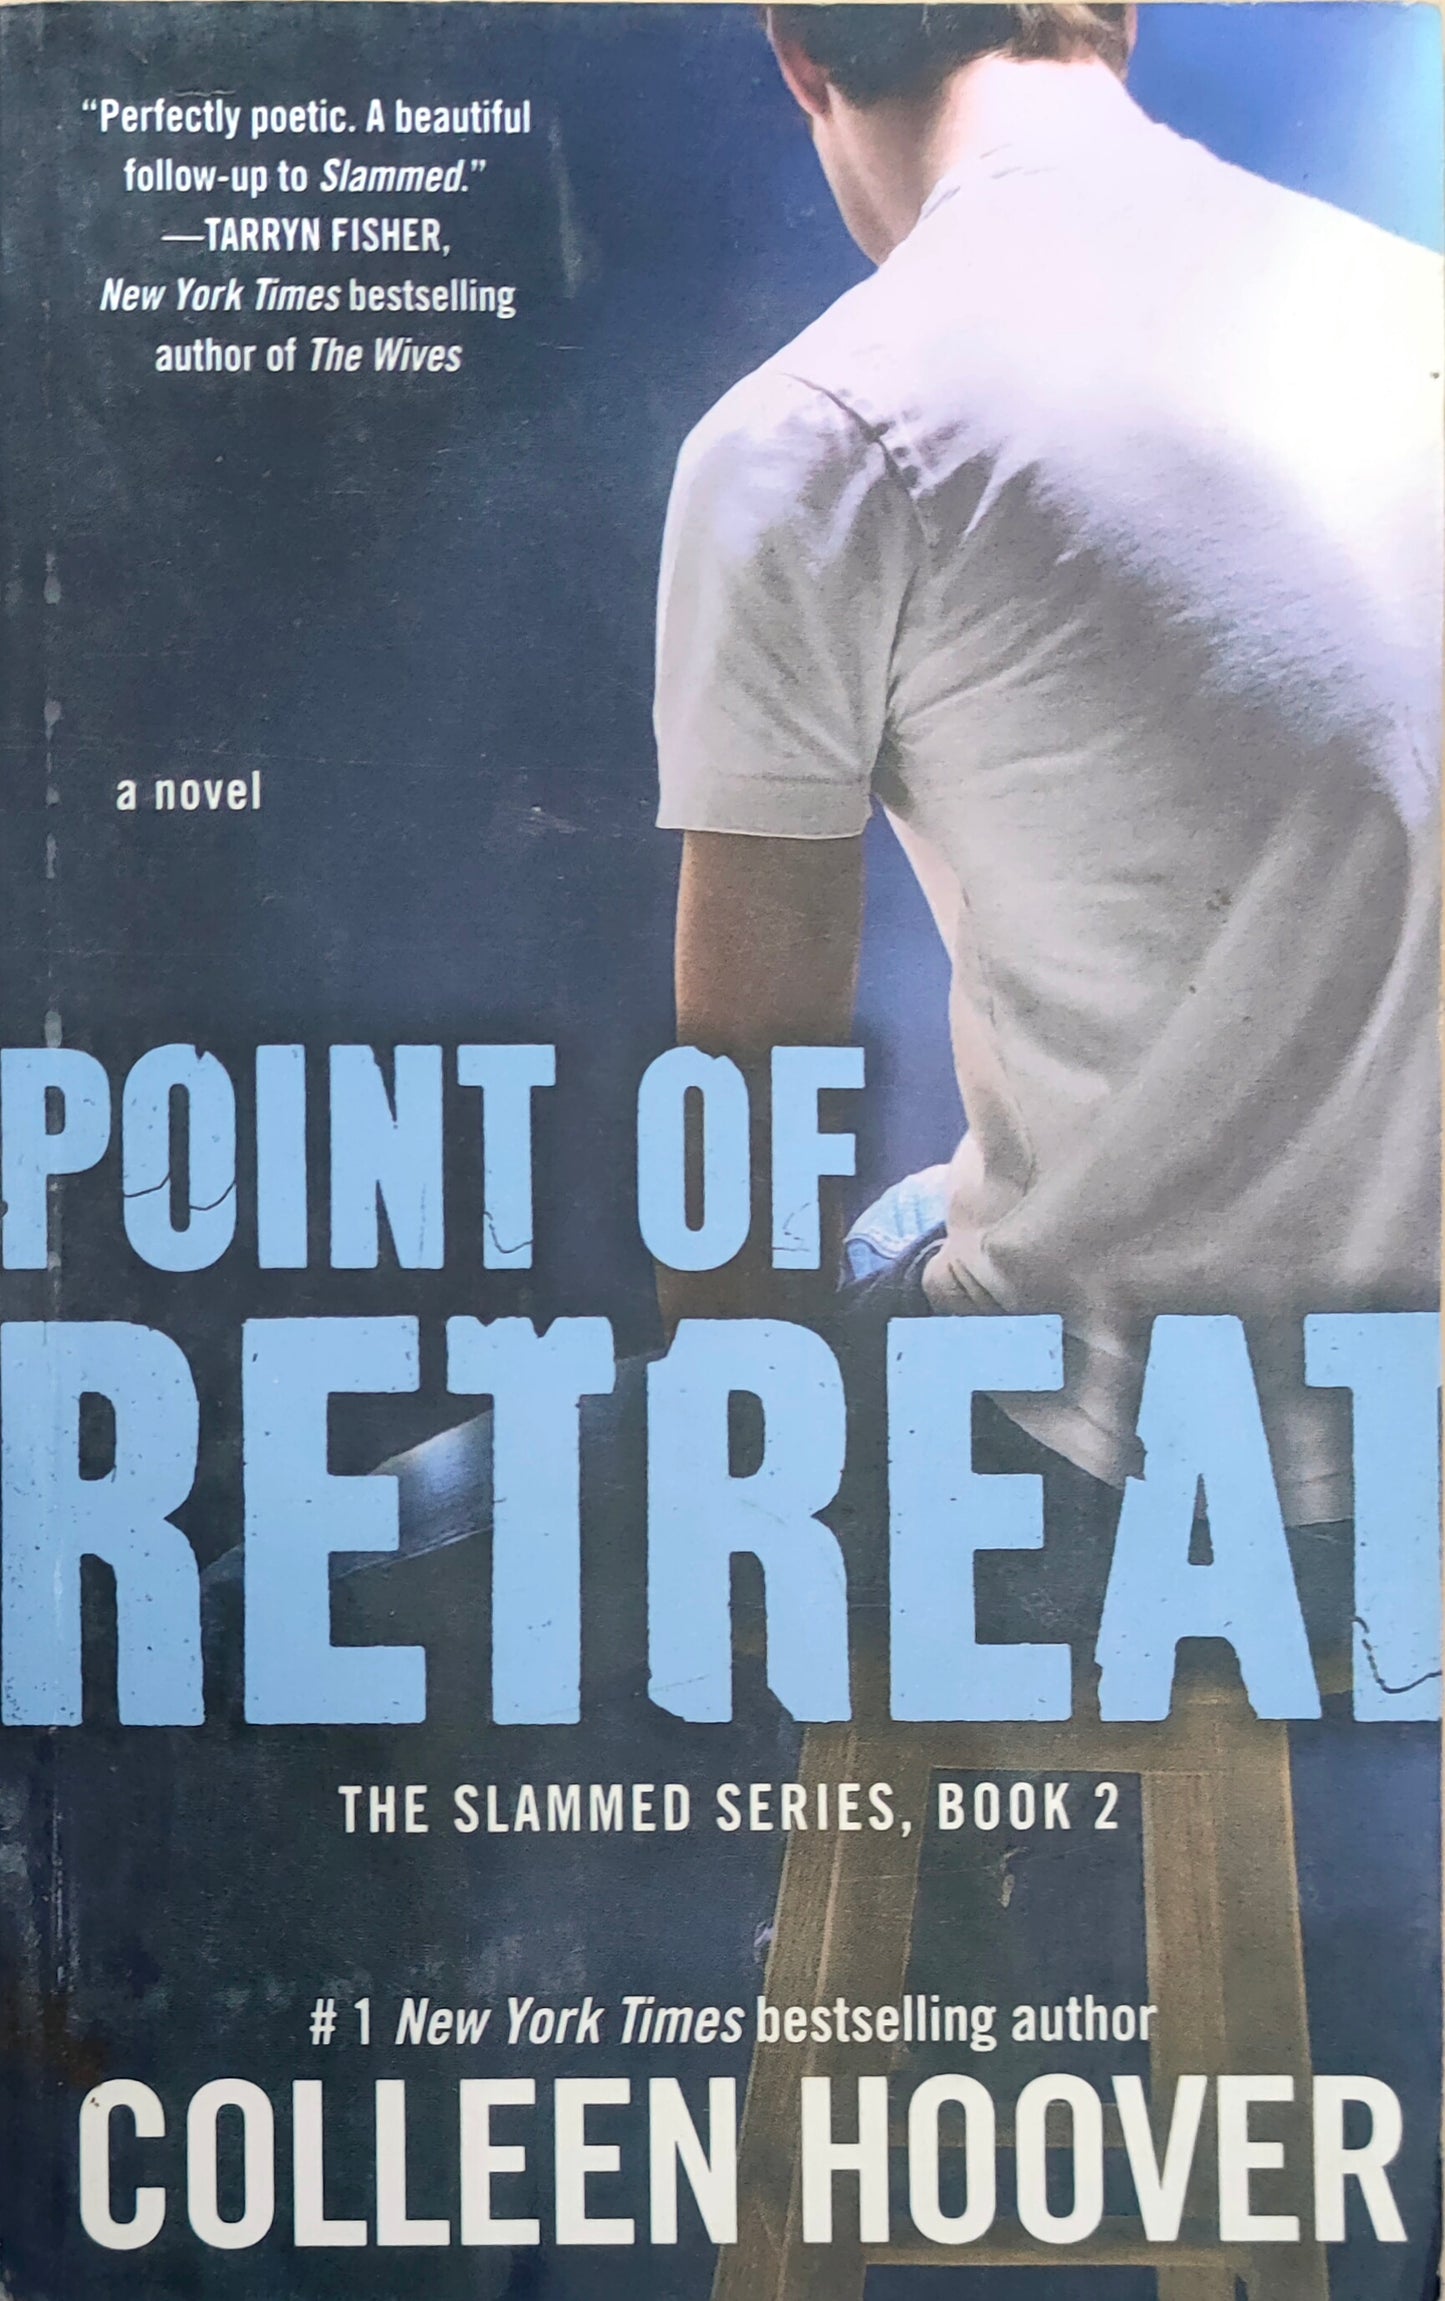 Point of retreat